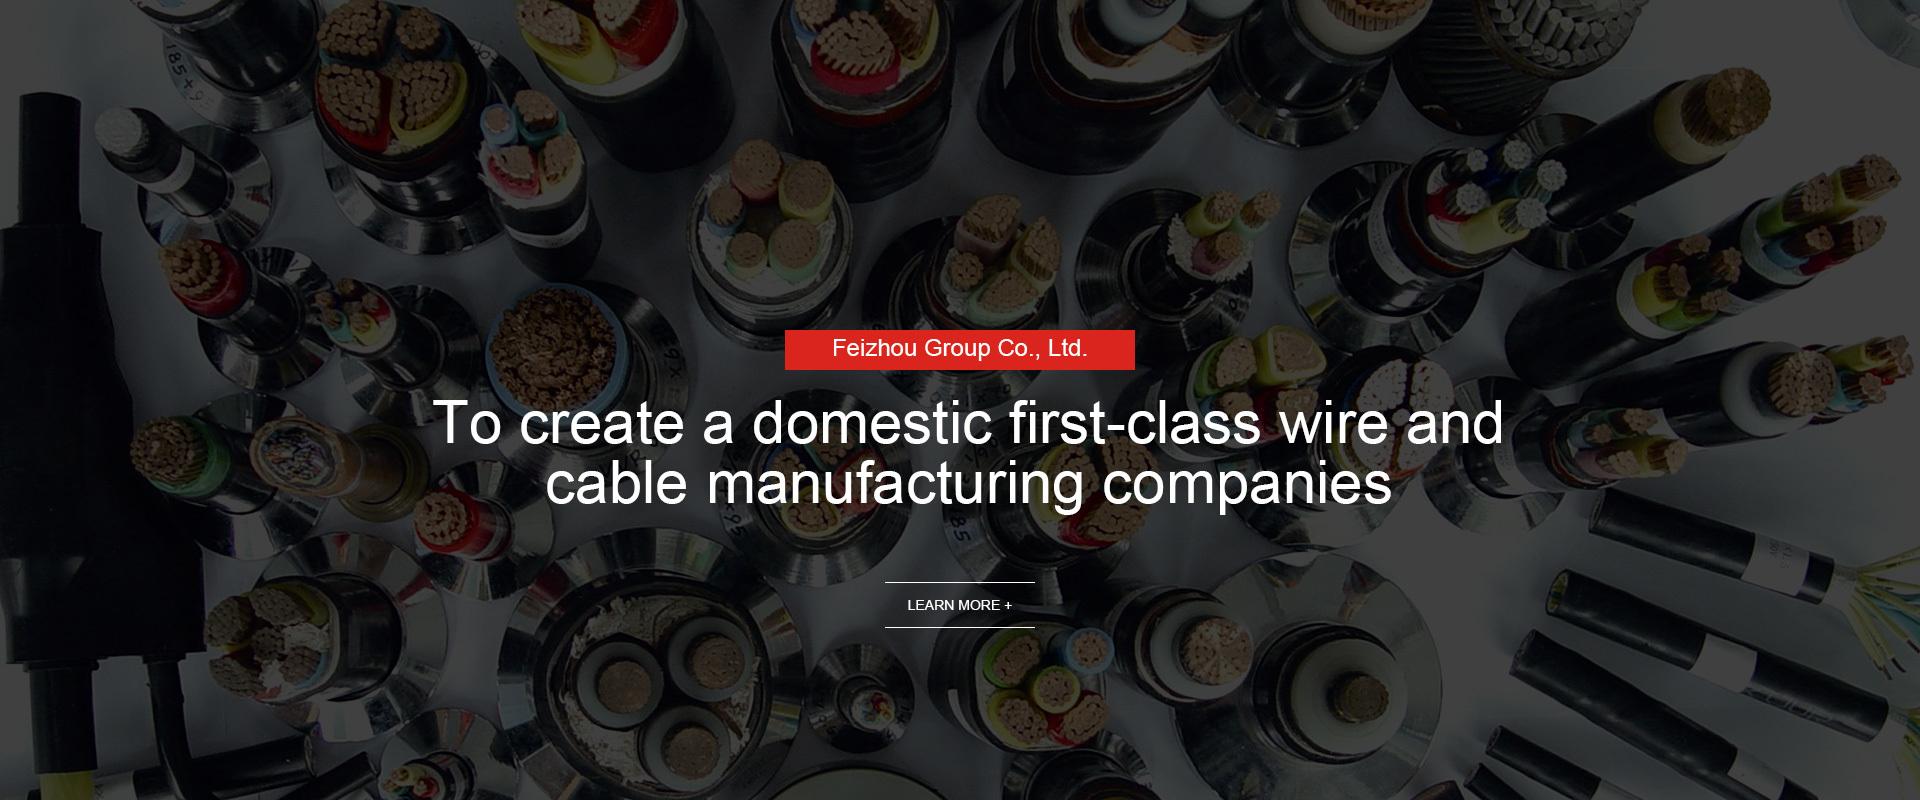 Wire and cable manufacturing